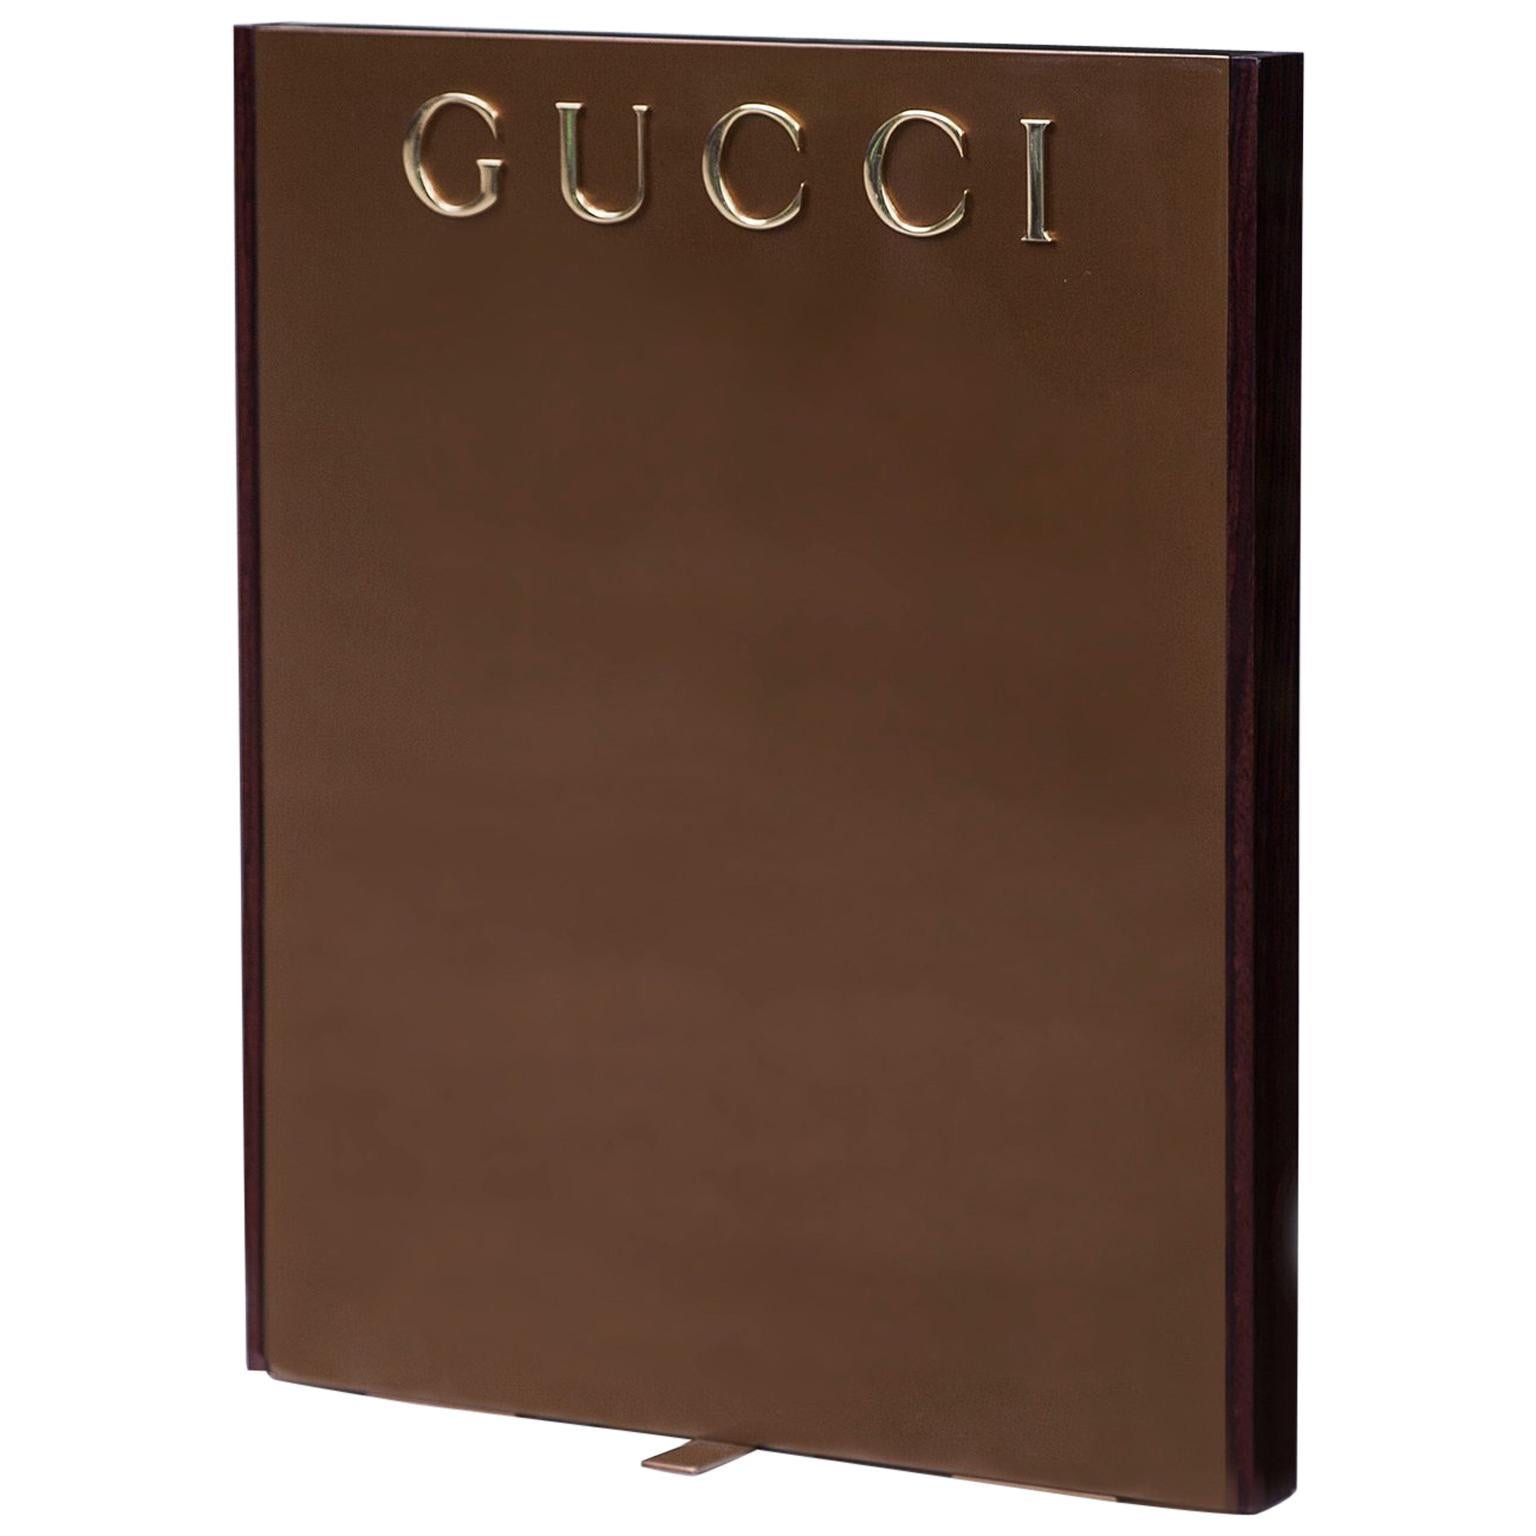 Huge Gucci Advertising Display Stand For Sale